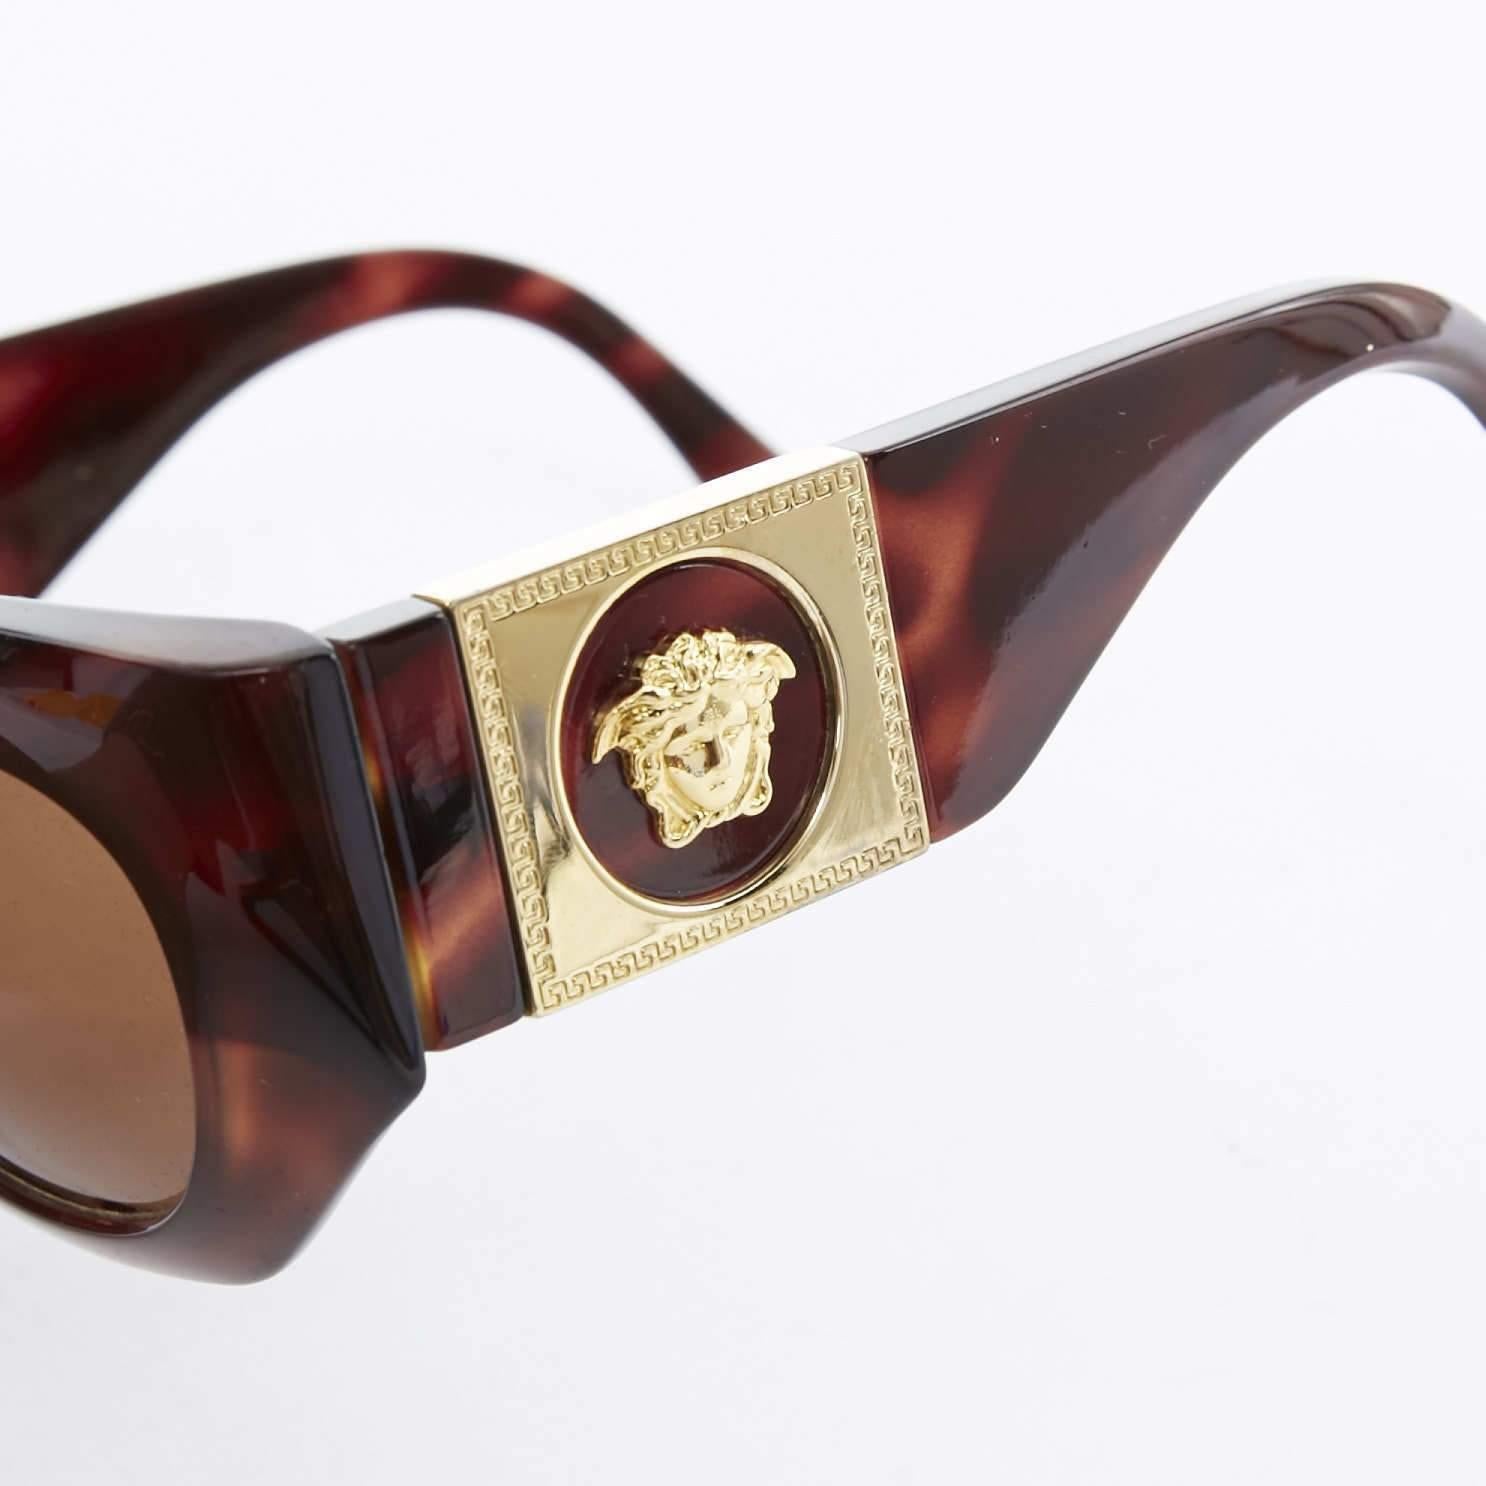 GIANNI VERSACE Vintage brown tortoise angular cateye gold Medusa sunglasses
GIANNI VERSACE
Brown tortoise resin frame . 
Angular frmae .
Cateye lens . 
Thick legs . 
God Medusa head embellished on side . 
Made in Italy

CONDITION:
Excellent- almost